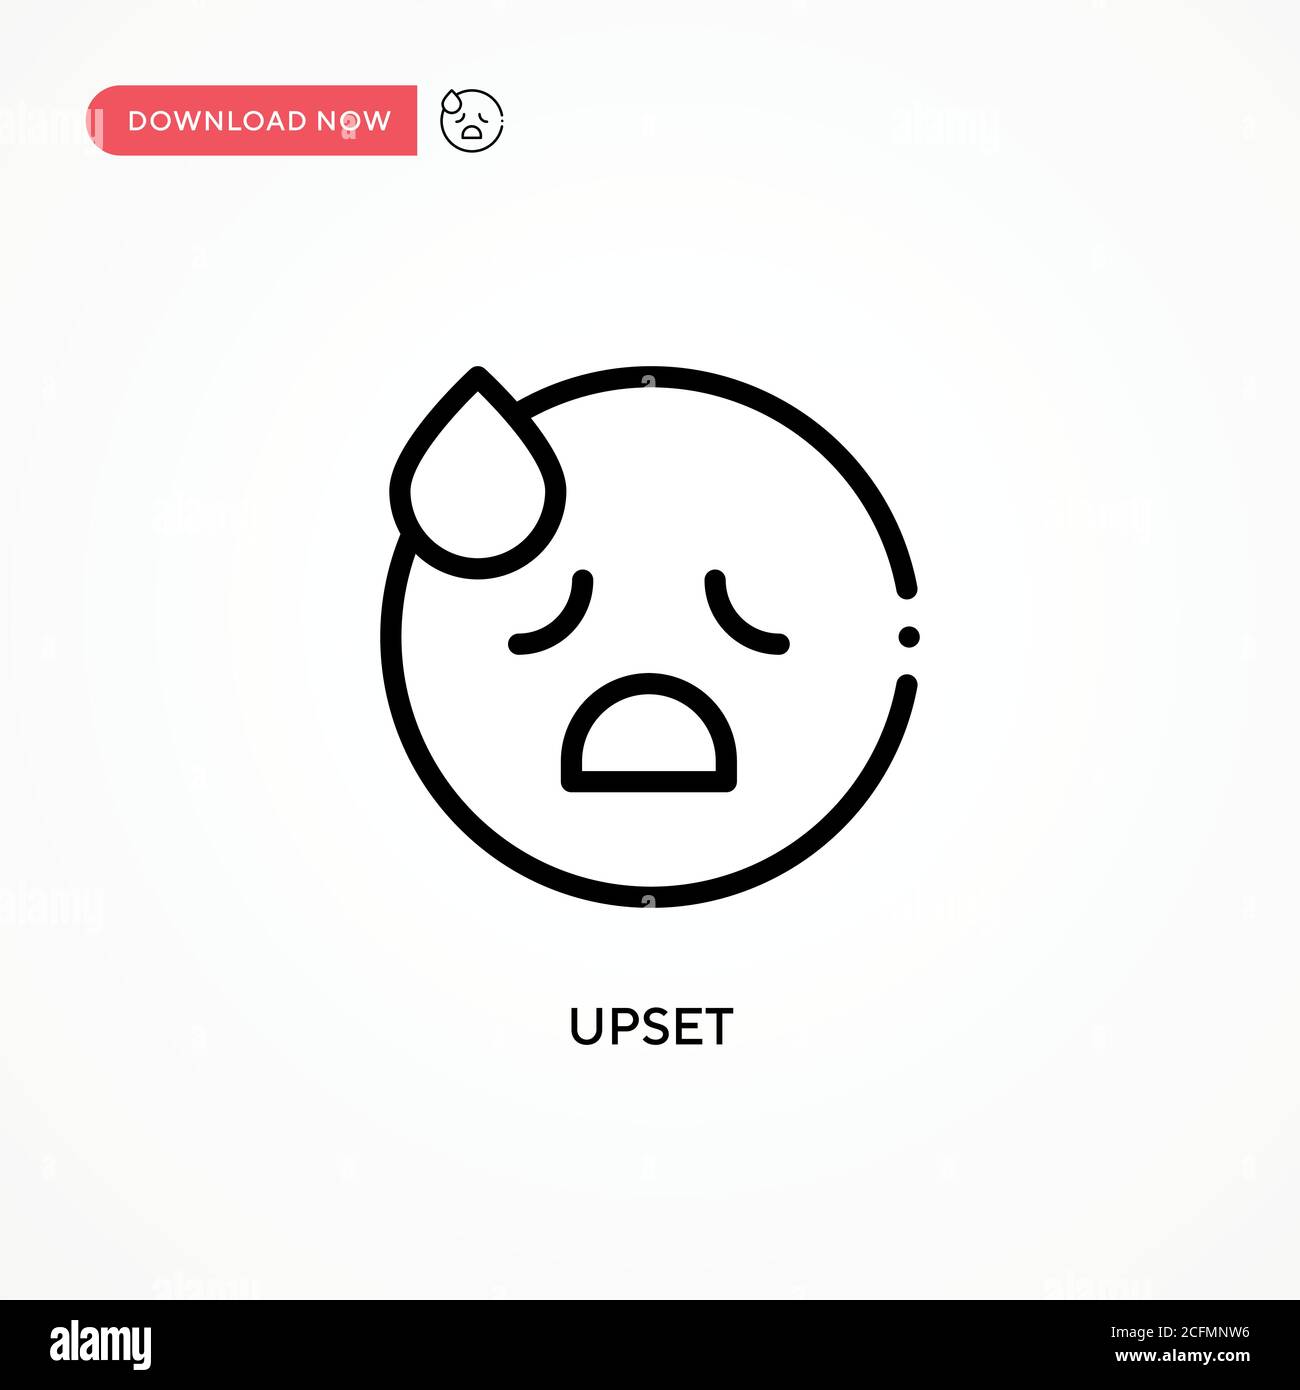 Upset vector icon. Modern, simple flat vector illustration for web site or mobile app Stock Vector